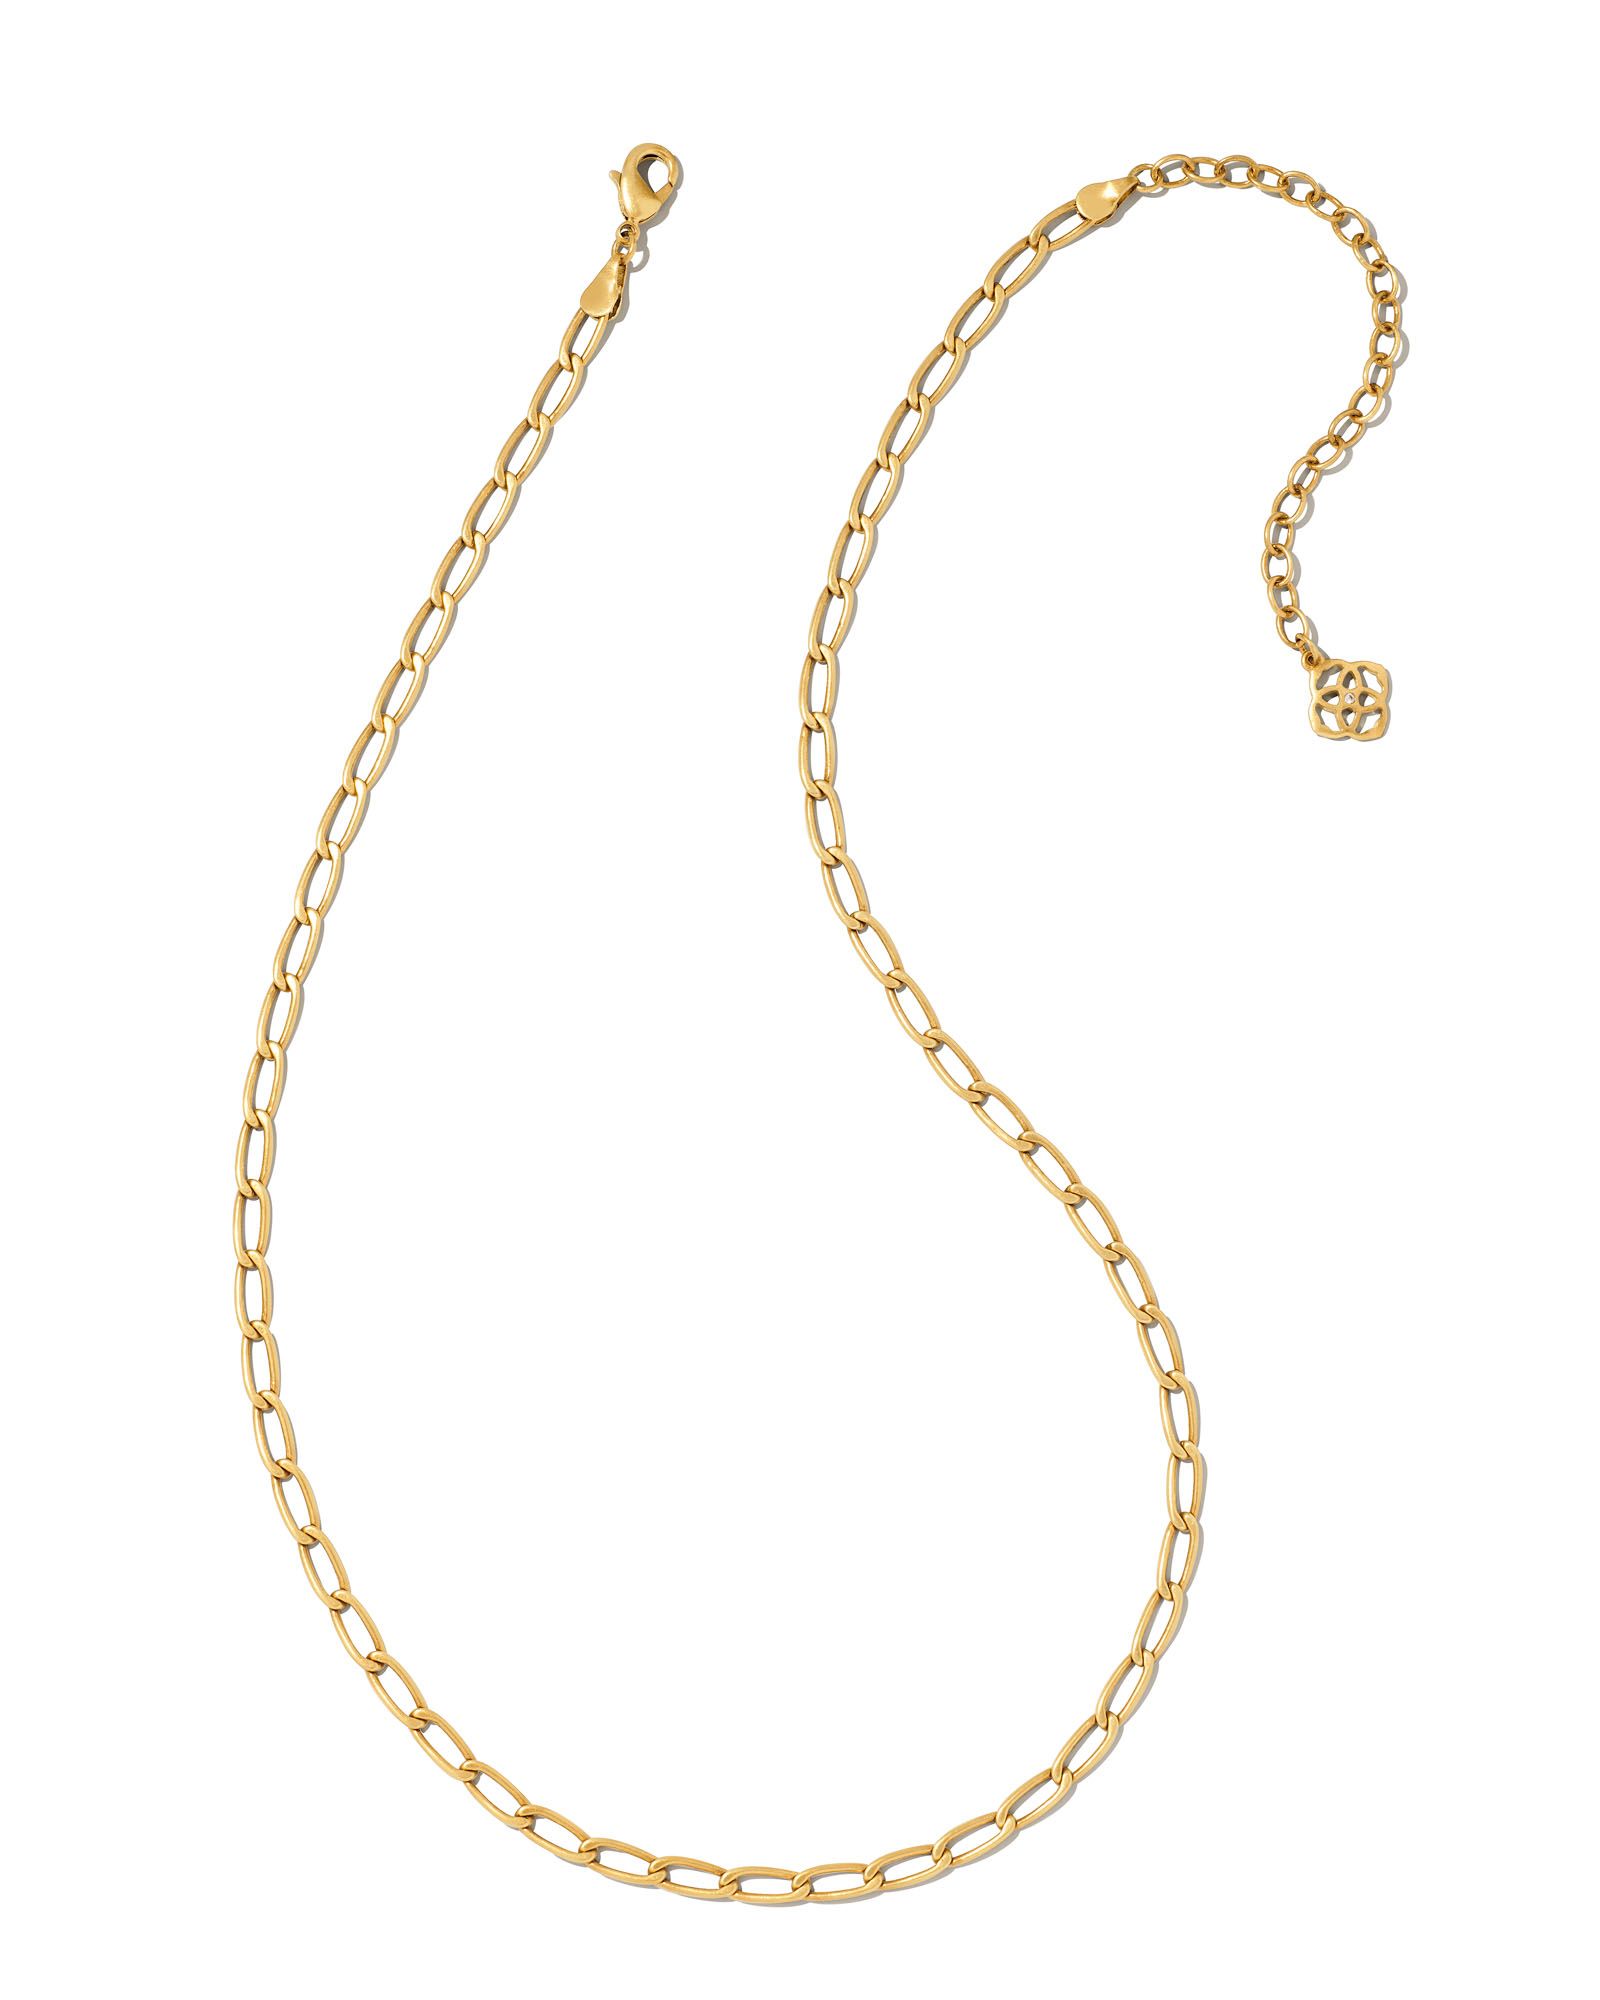 Merrick Chain Necklace in Vintage Gold | Kendra Scott